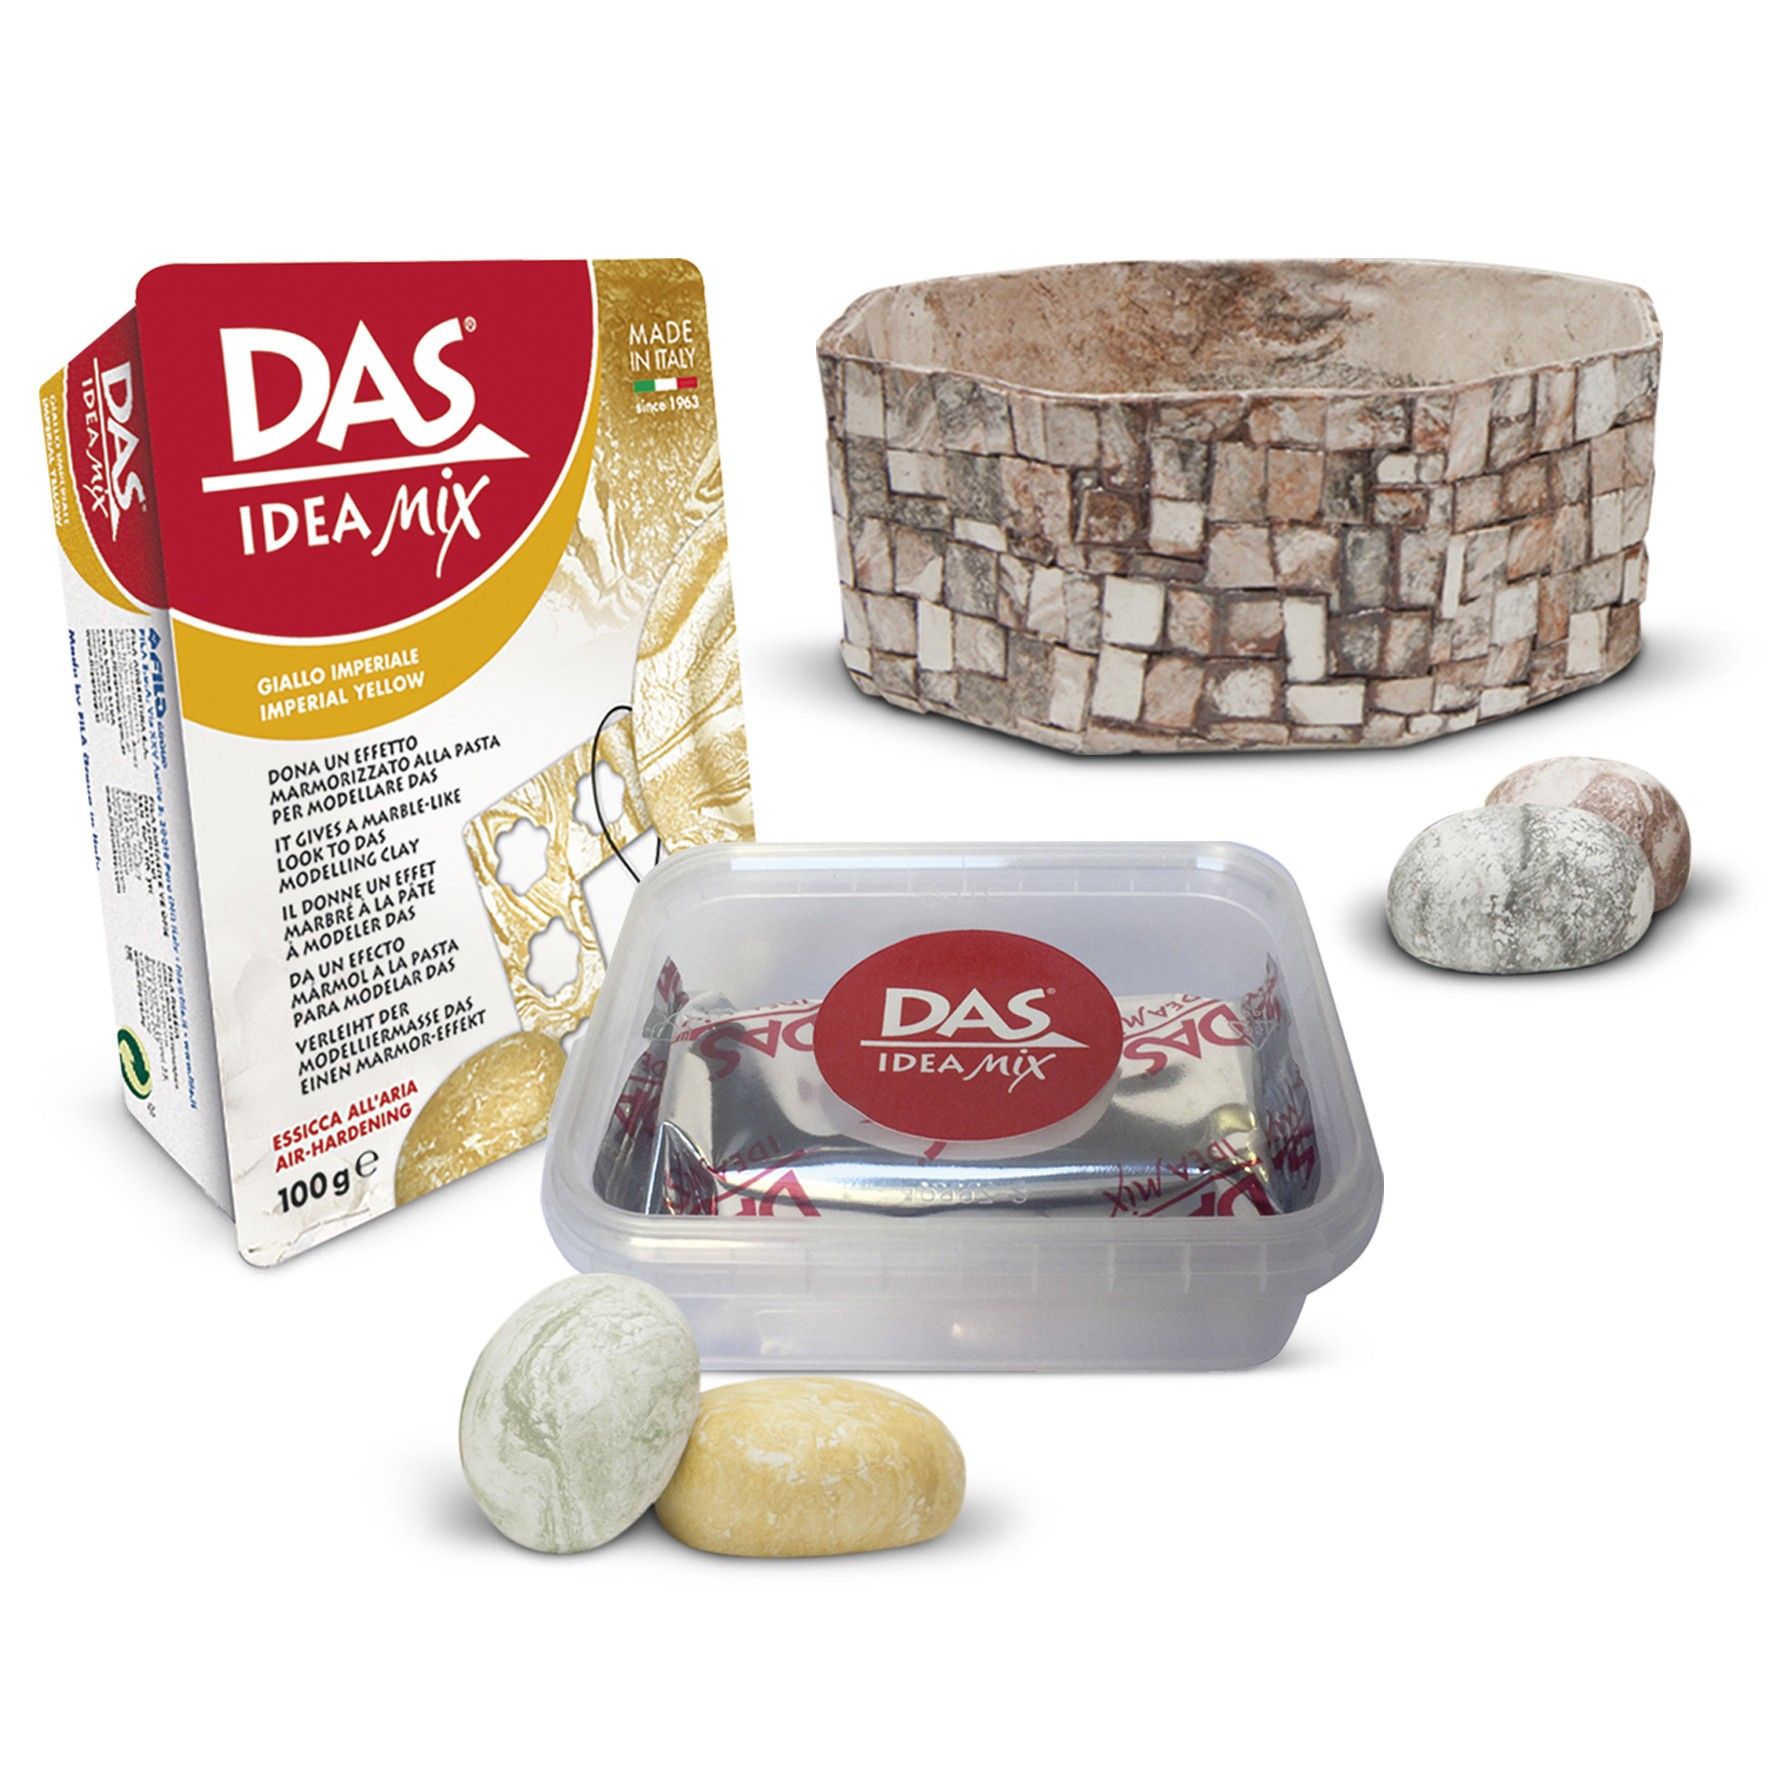 DAS IDEA MIX AIR DRYING MODELLING CLAY CREATE A MARBLE MARBLING EFFECT 100g 